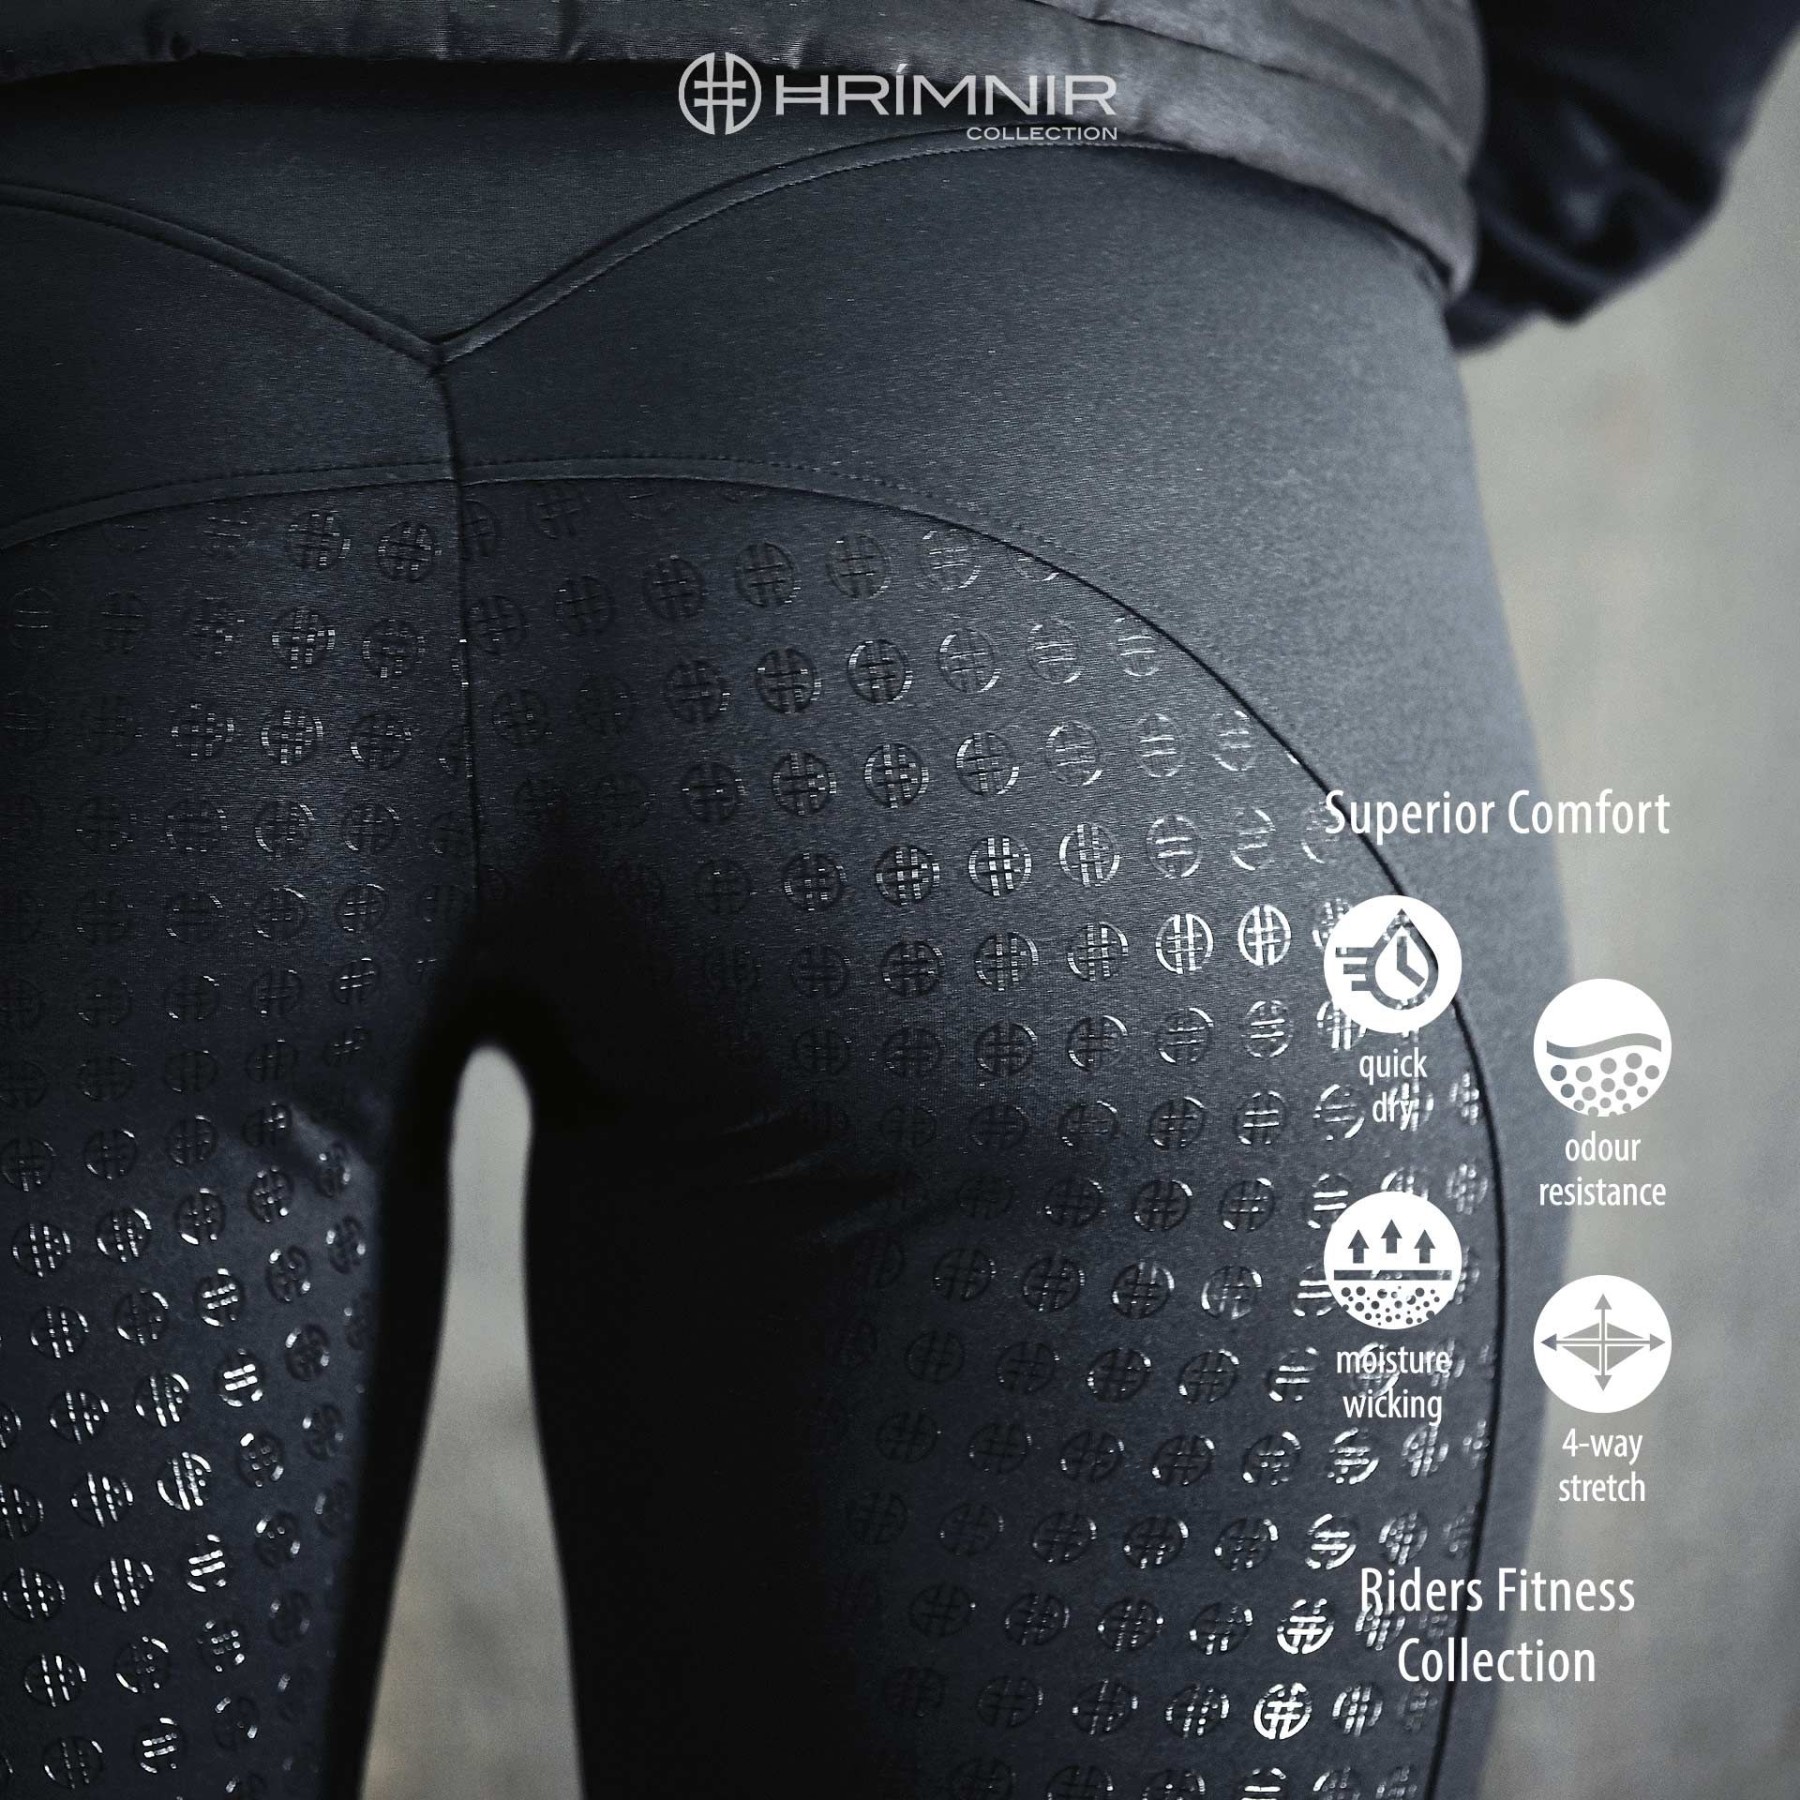 Hrimnir Fitness Tights features